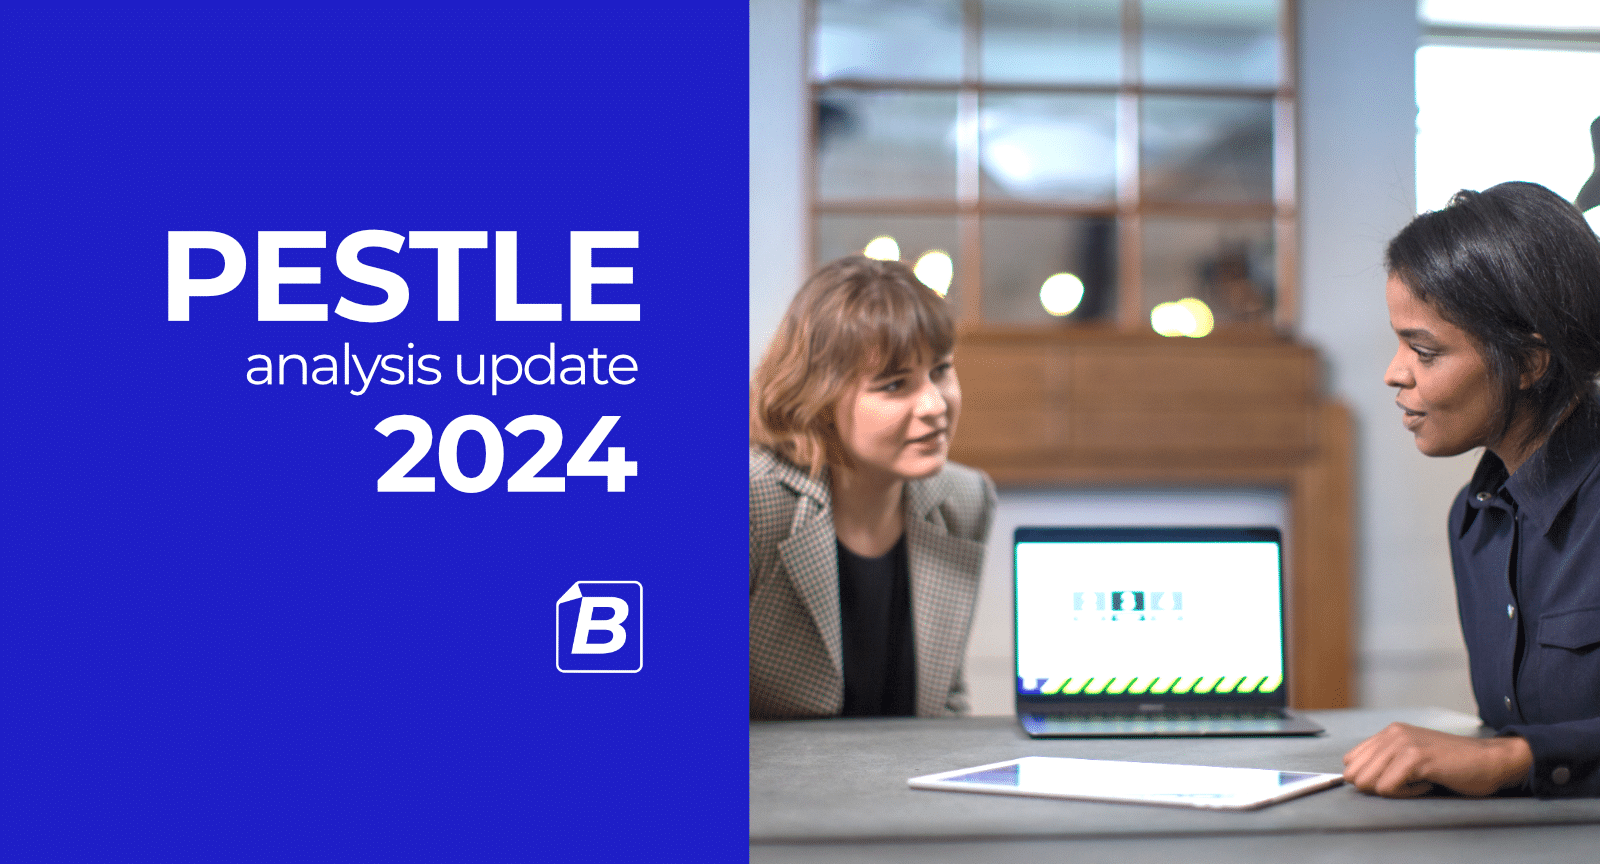 PESTLE Analysis Update for 2024